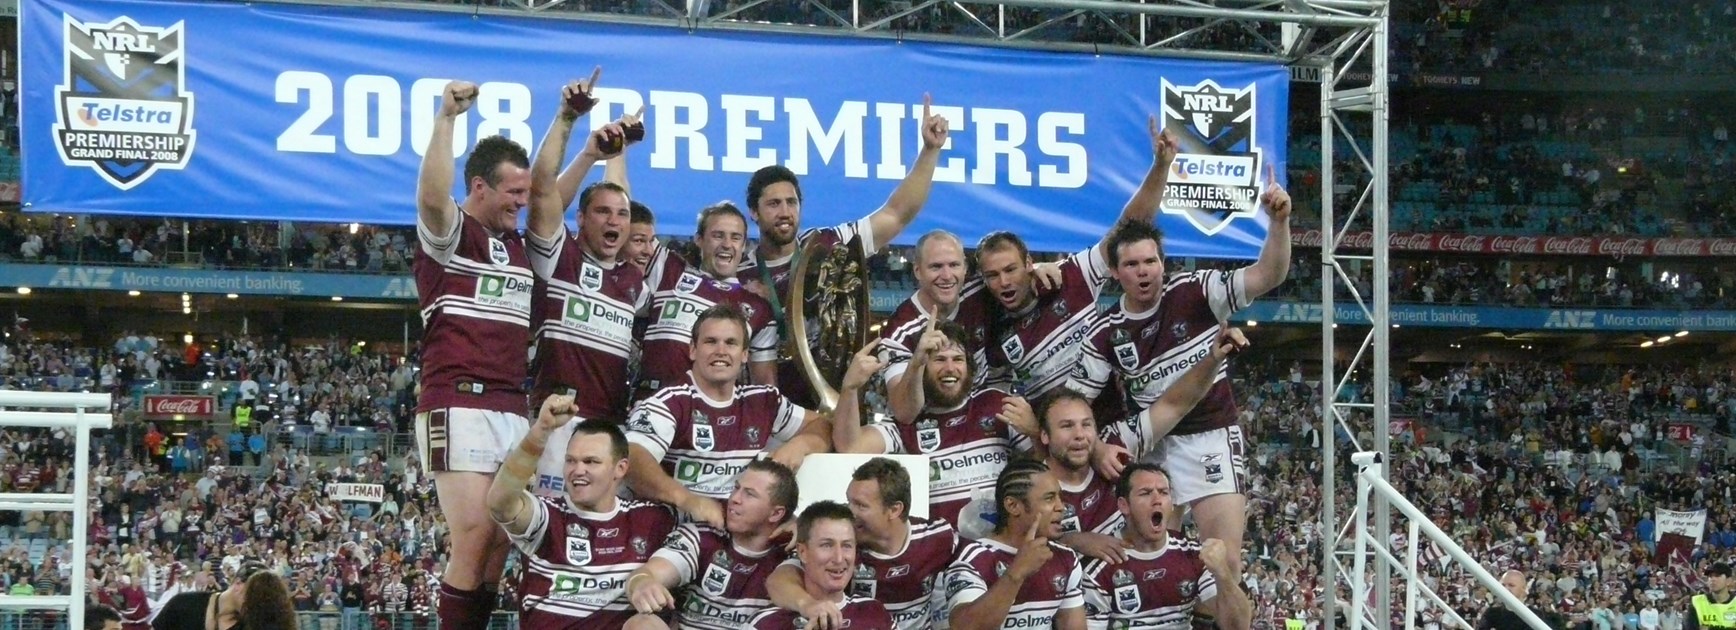 2008 Grand Final Flashback: The famous 40-0